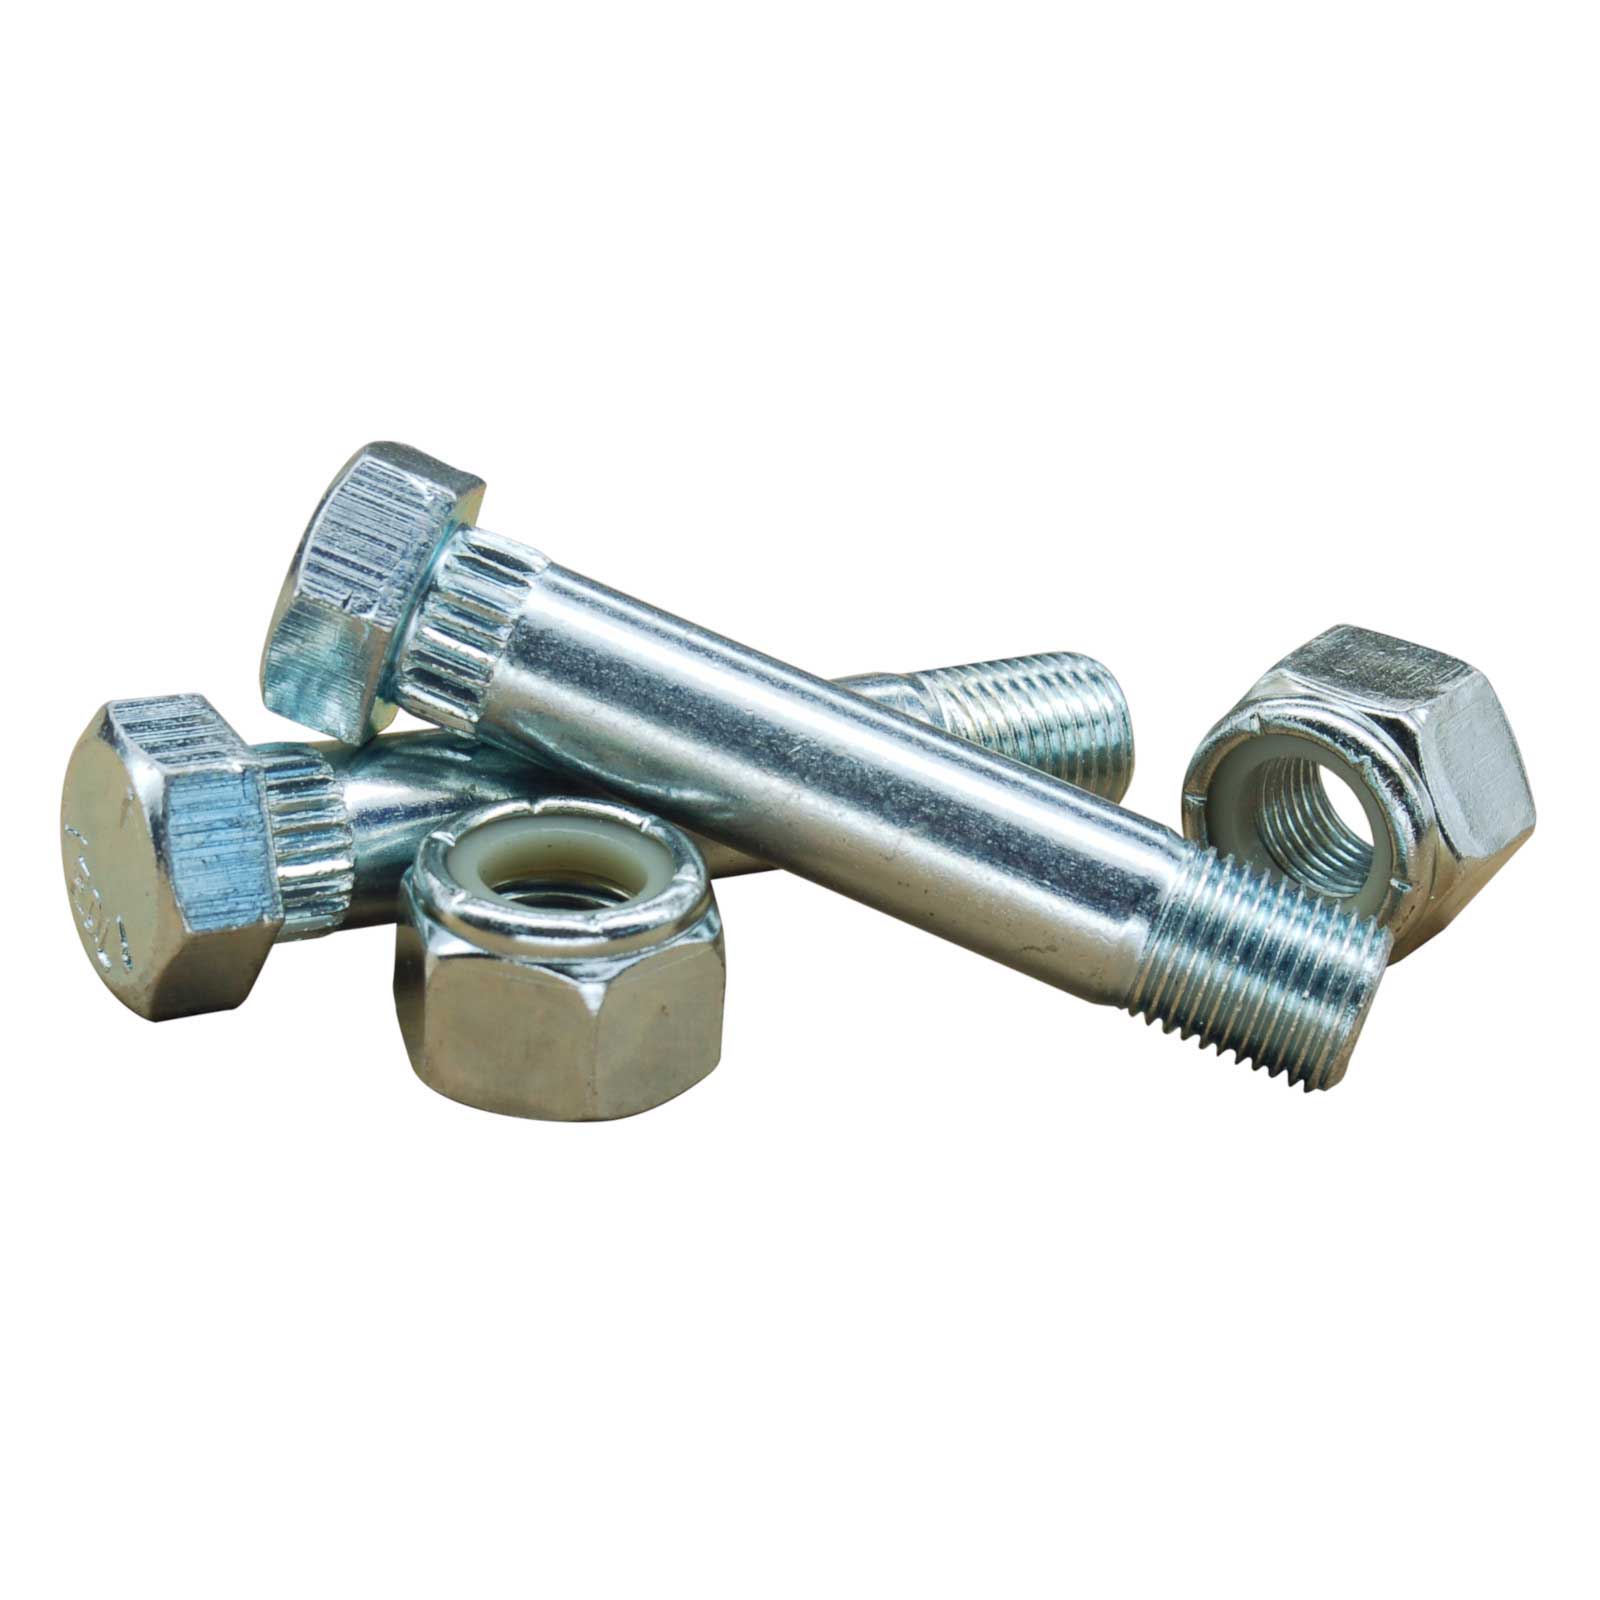 Tie Down Marine Fluted Shackle Bolts (Carton of 12)